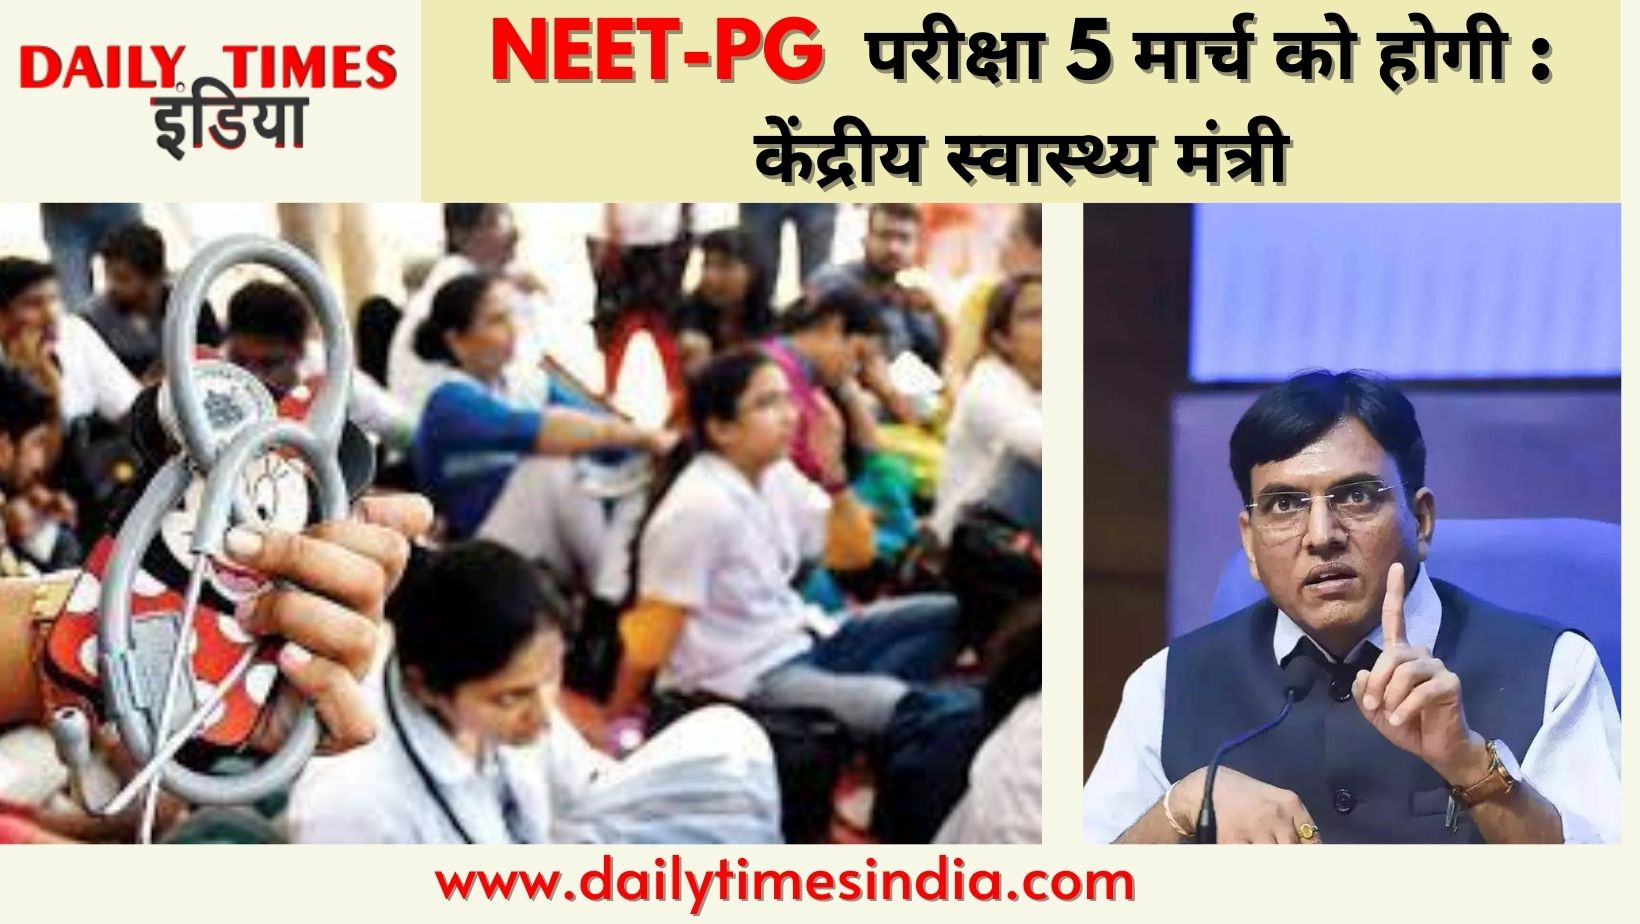 NEET-PG exam to be held on March 5 : Union Health Minister